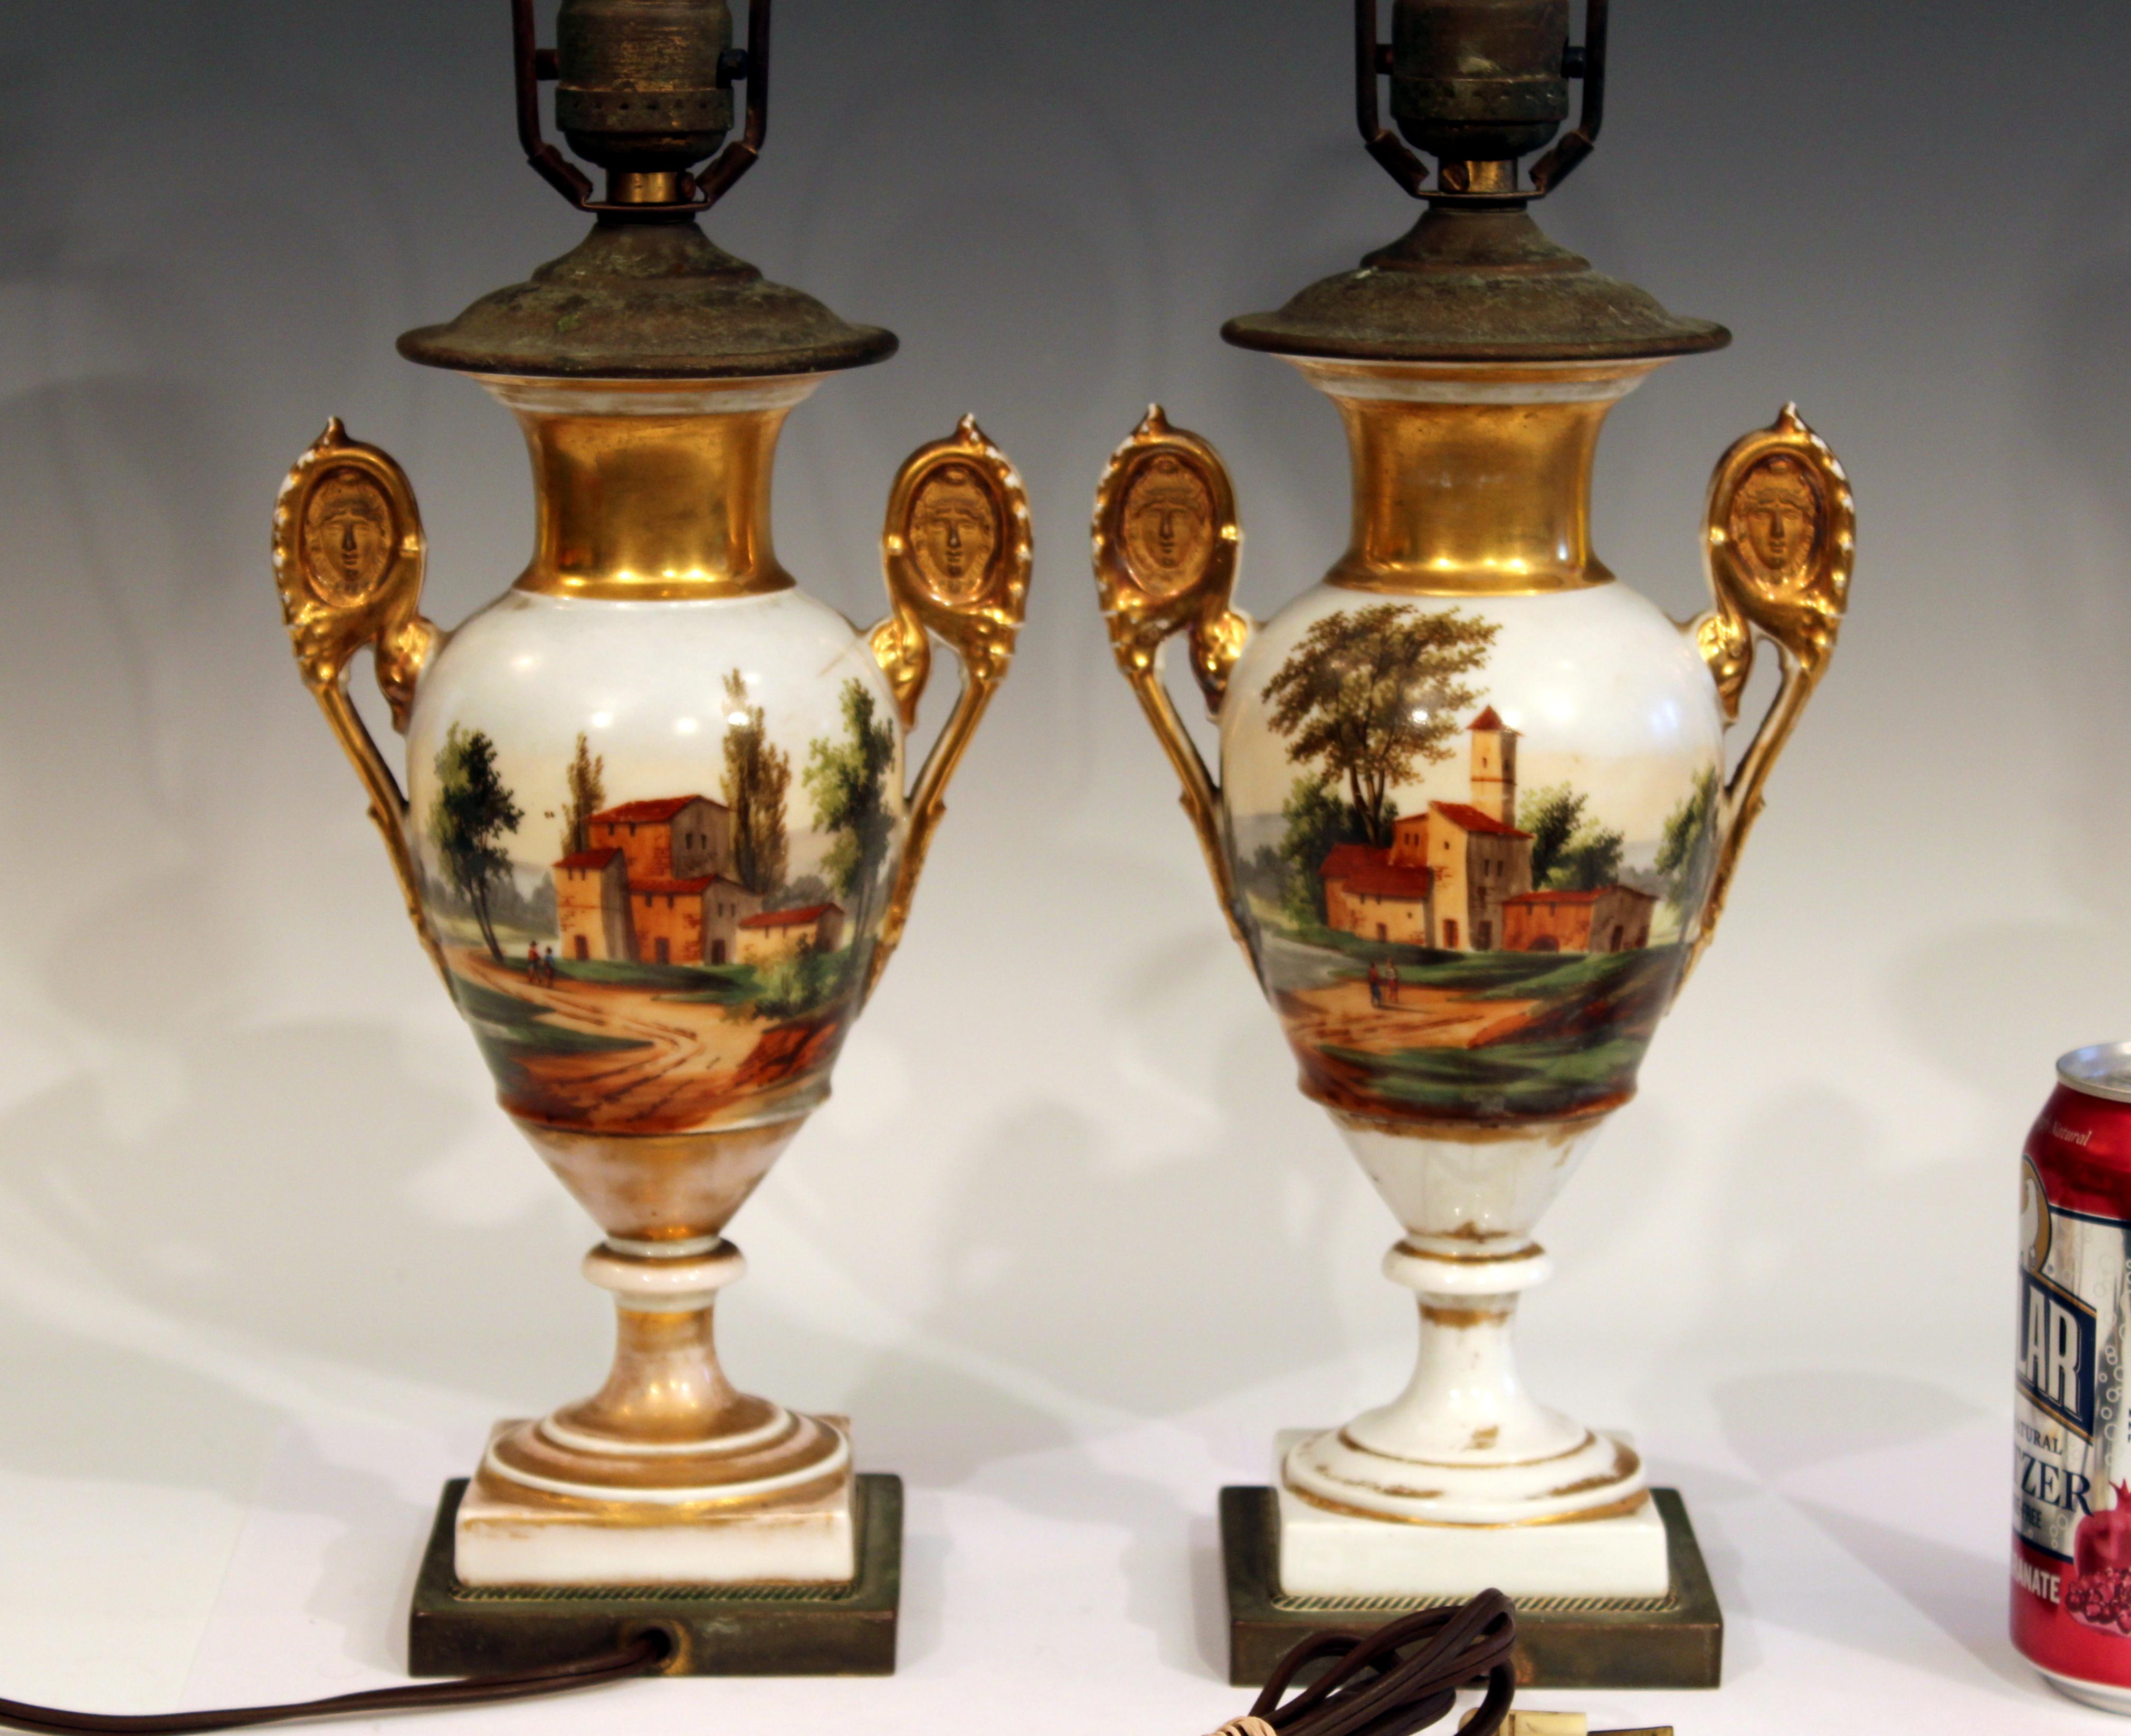 Empire Pair of Old Paris Porcelain French Vases Lamps Country, 19th Century Garniture